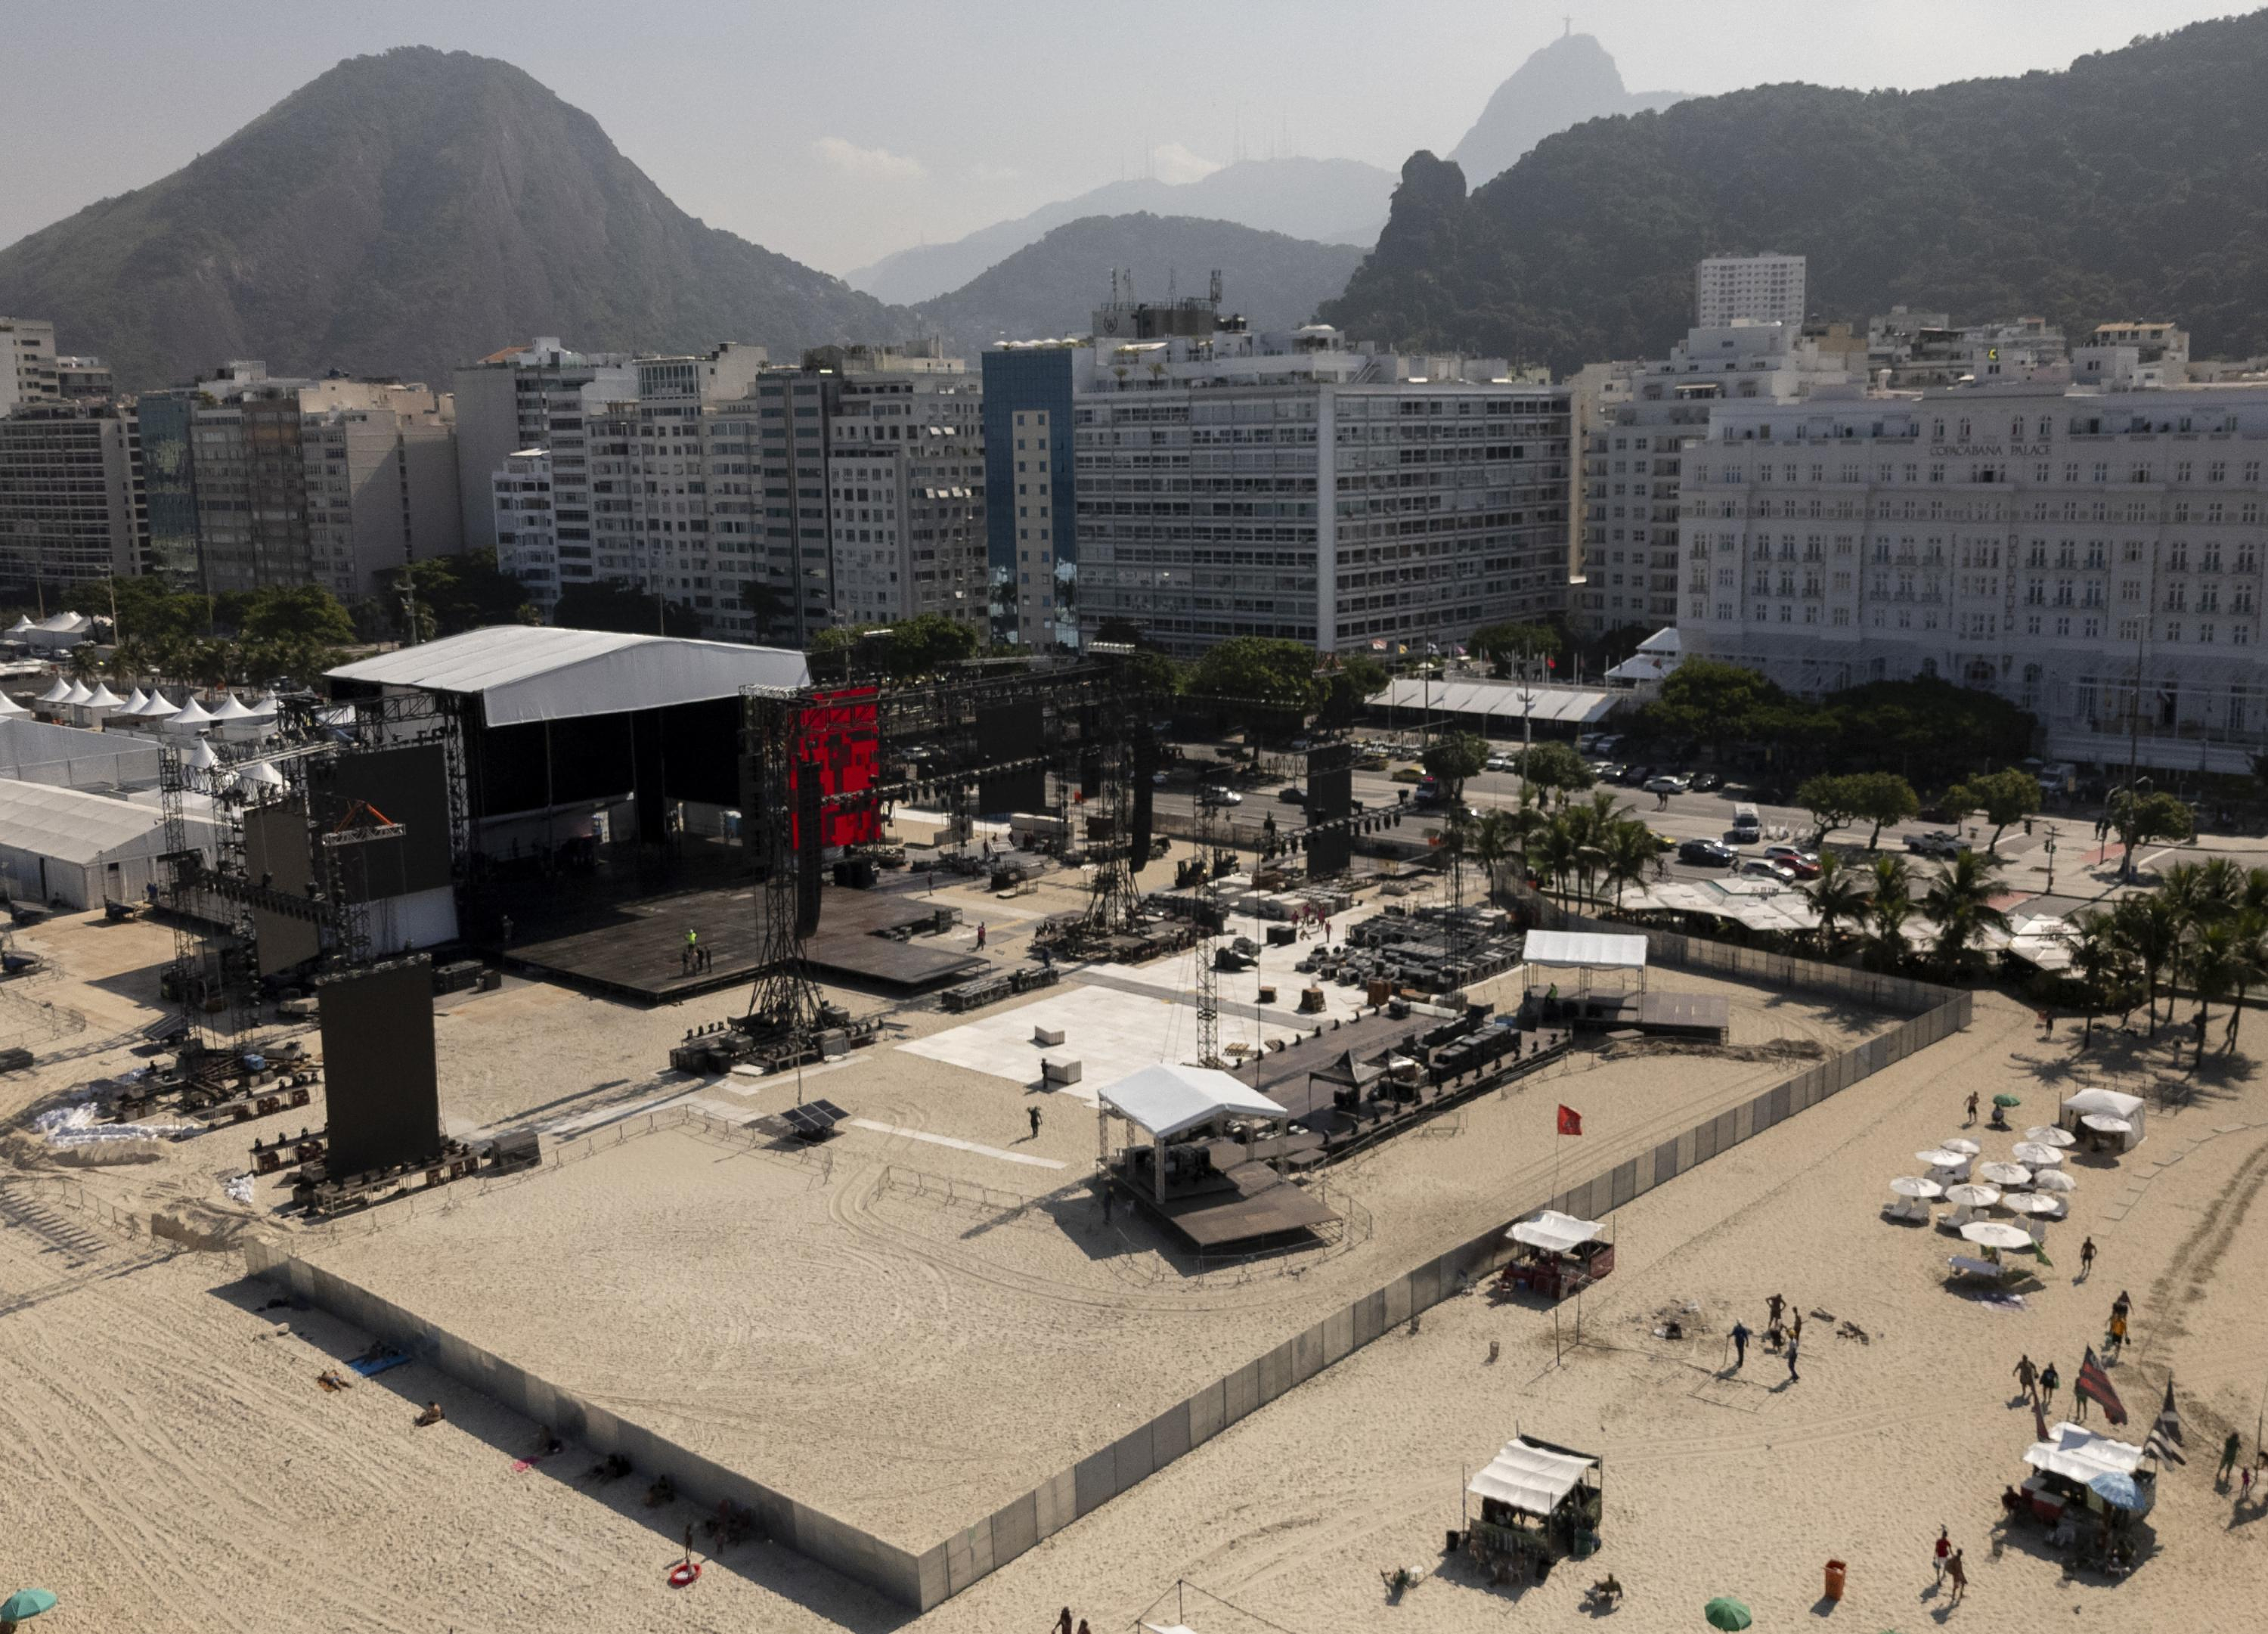 Madonna ends her world tour with a giant - and free - concert in Copacabana